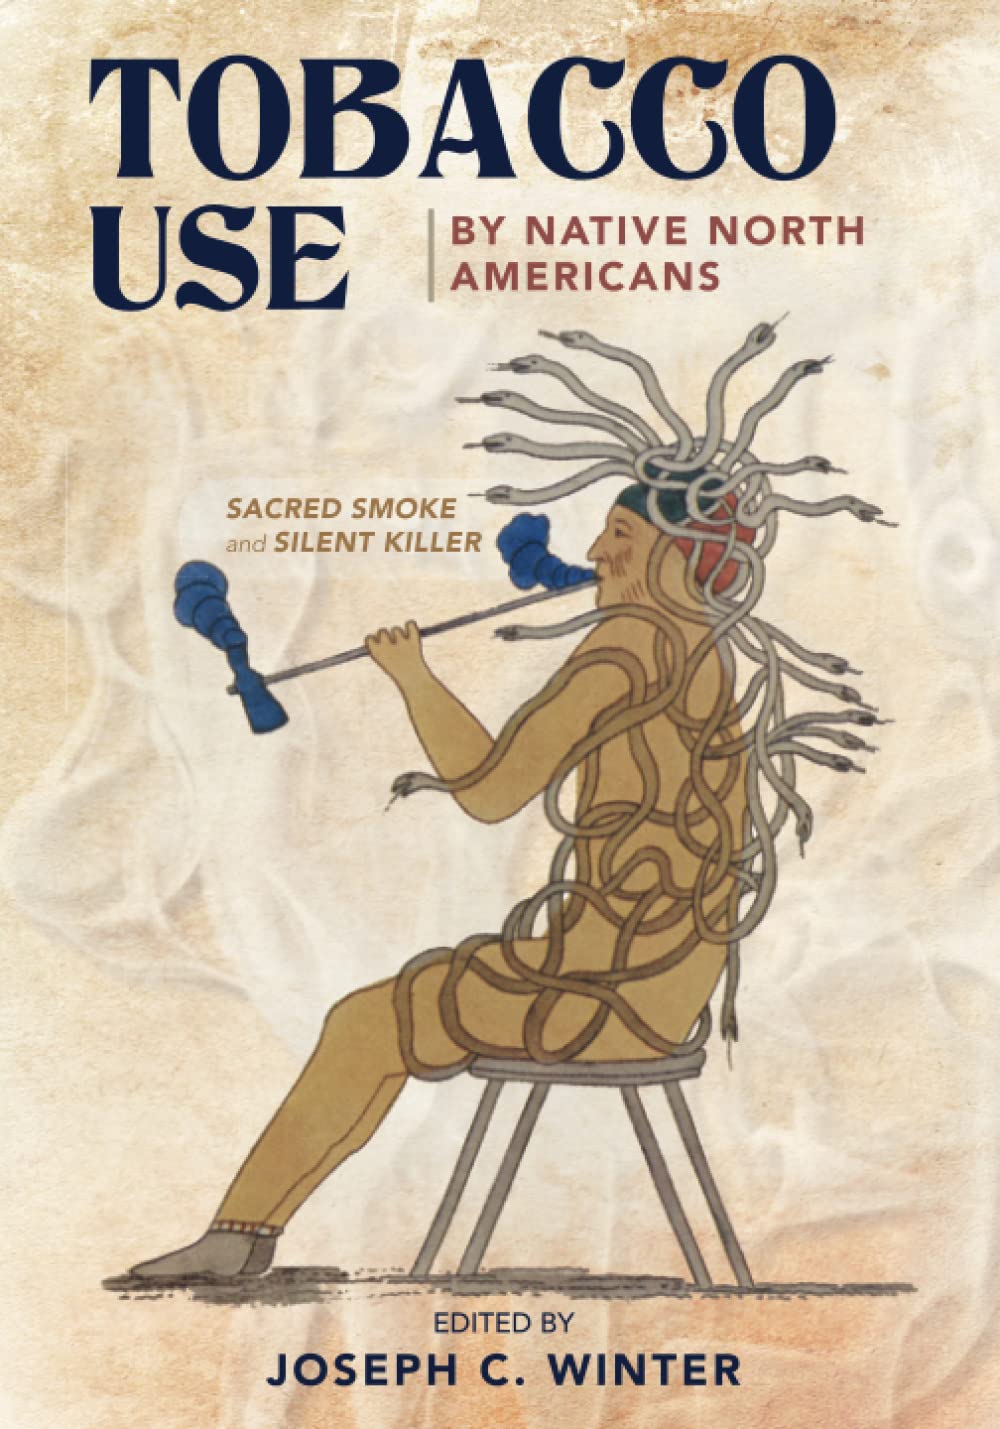 Tobacco Use by Native North Americans: Sacred Smoke and Silent Killer edited by Joseph C. Winter